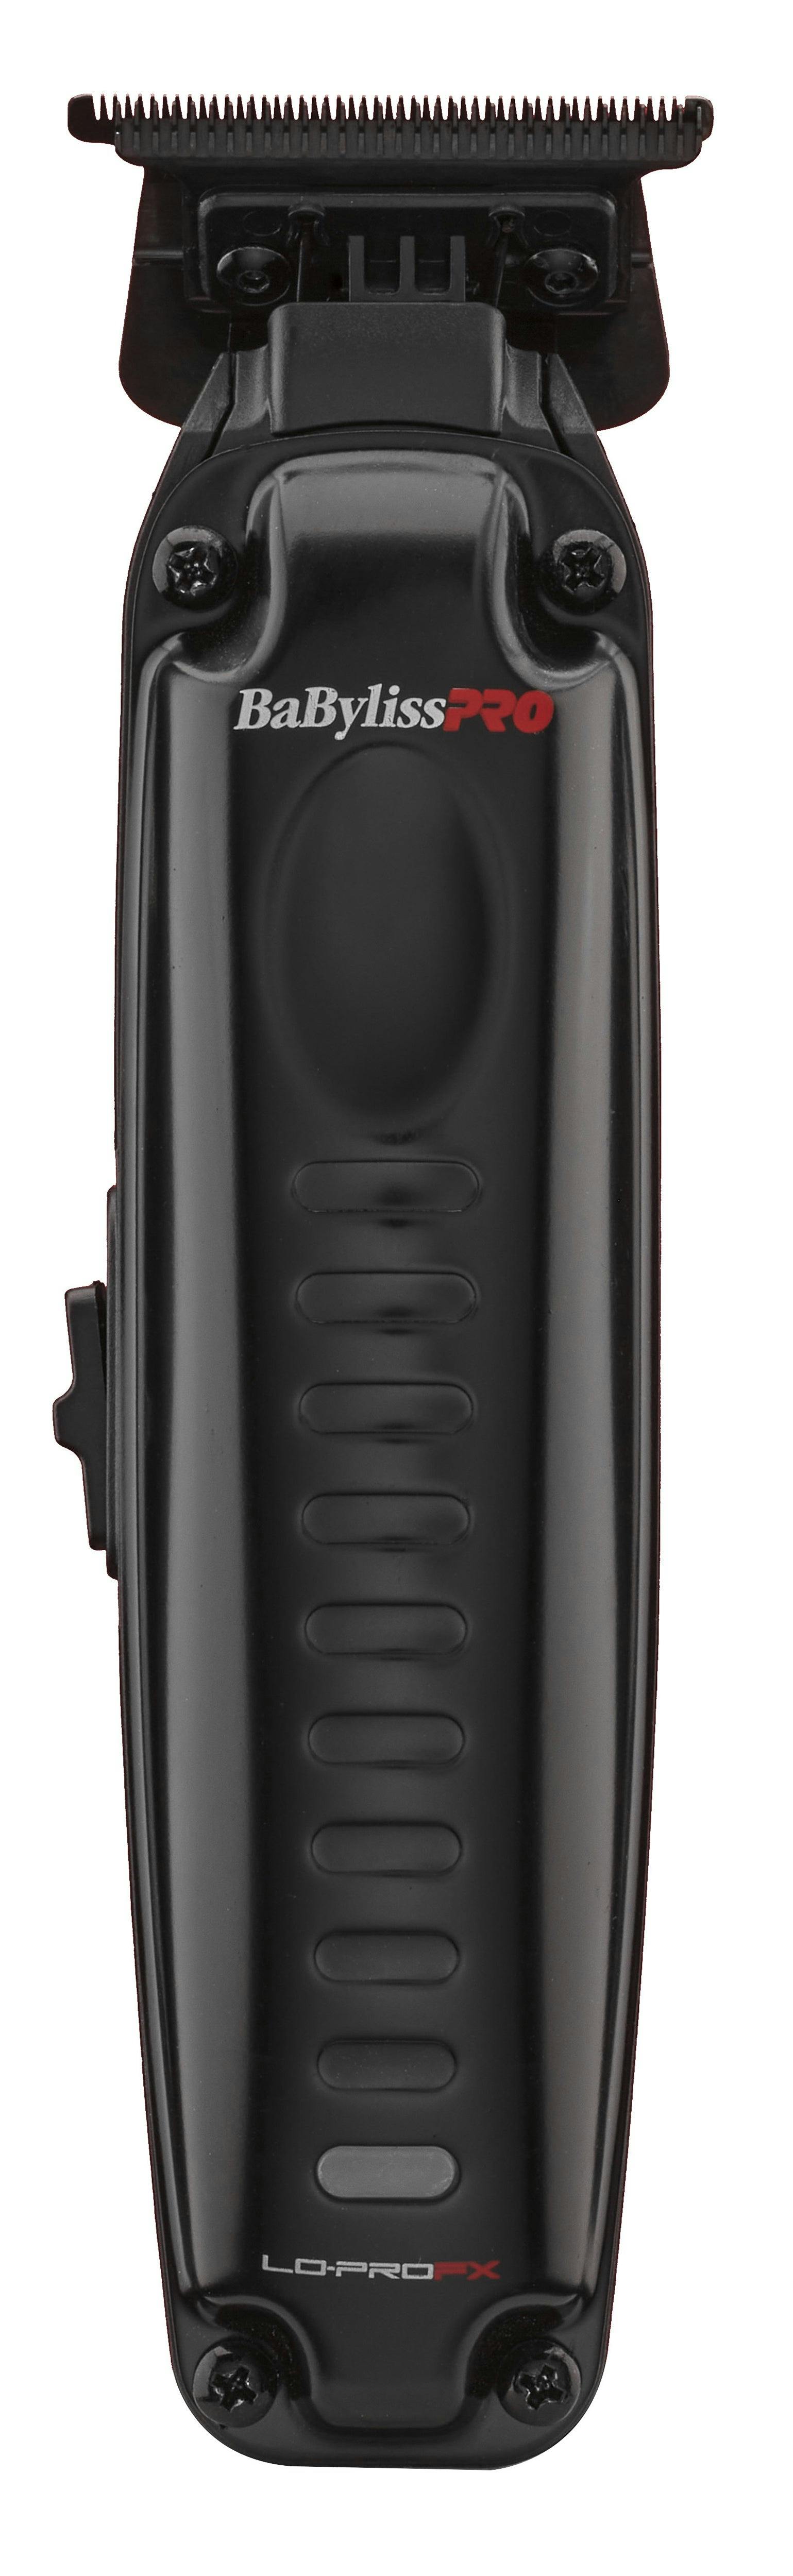 BaBylissPRO LoProFX Low Profile Trimmer